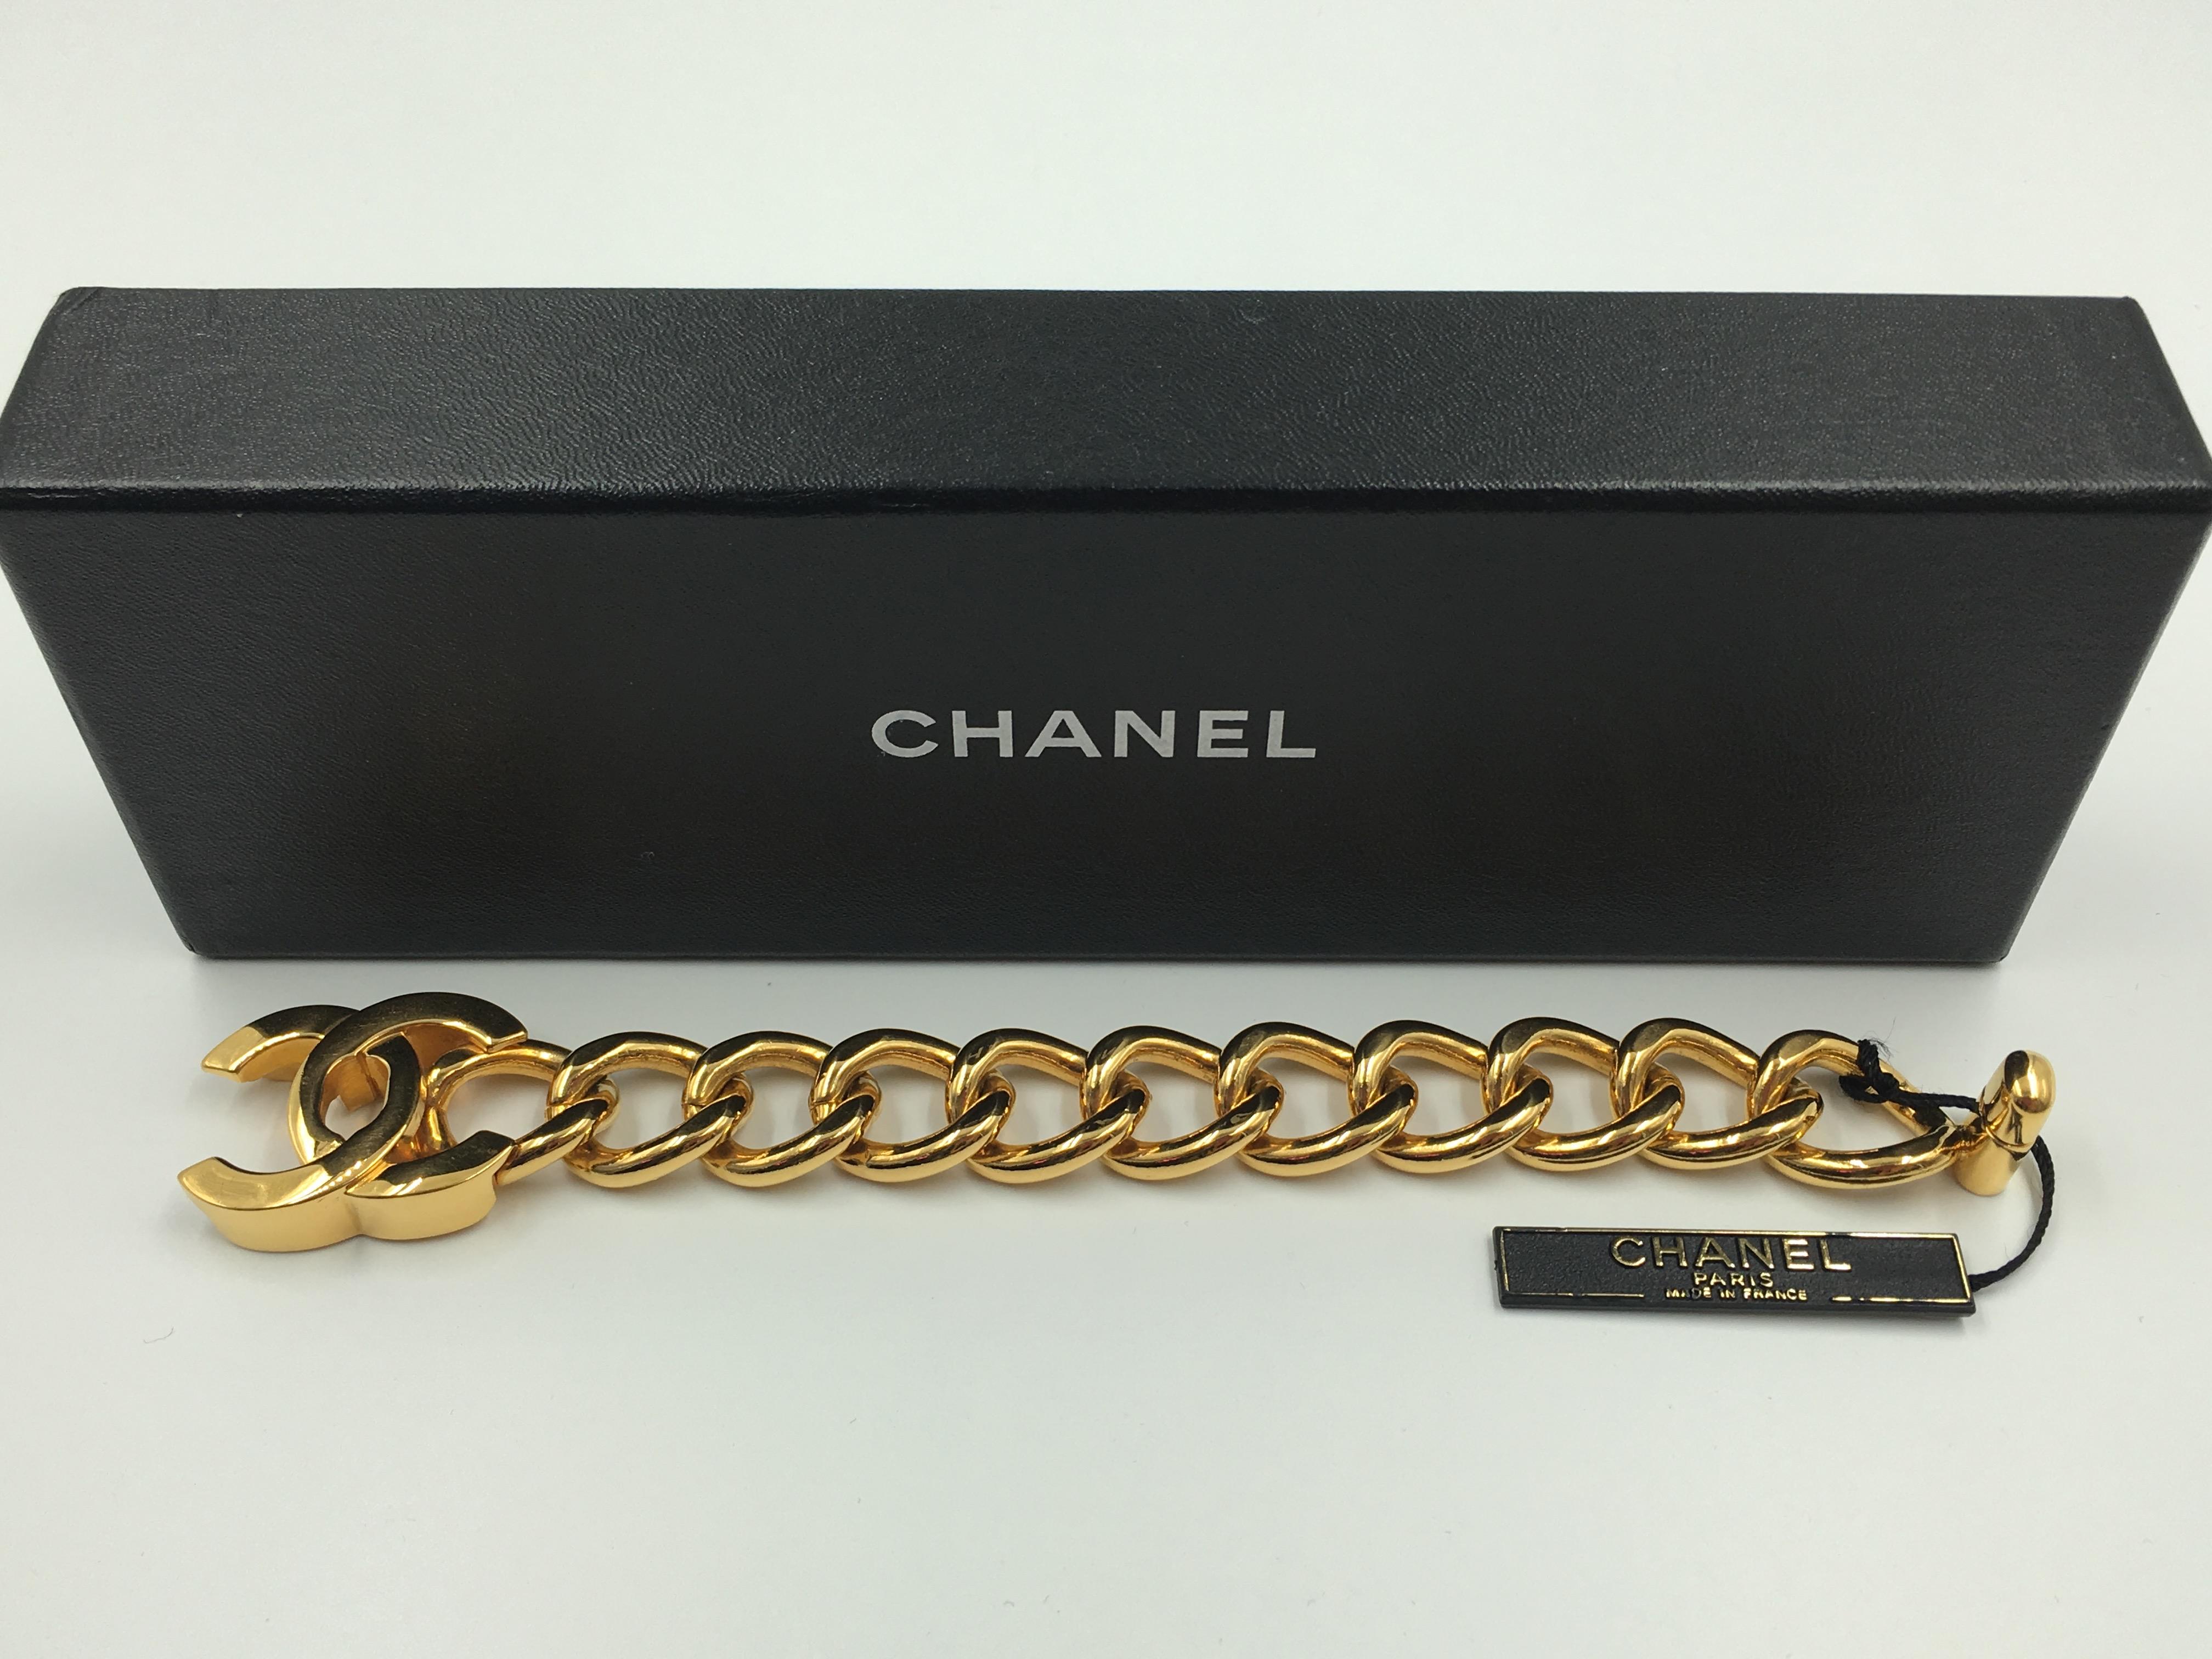 Chanel Gold Tone CC Logo Chunky Chain Bracelet. Features a turn style closure at the center of the CC logo. Original tag attached and Chanel box included. 
In very good condition. 

Measurements are as follows:
Length (closed circumference from